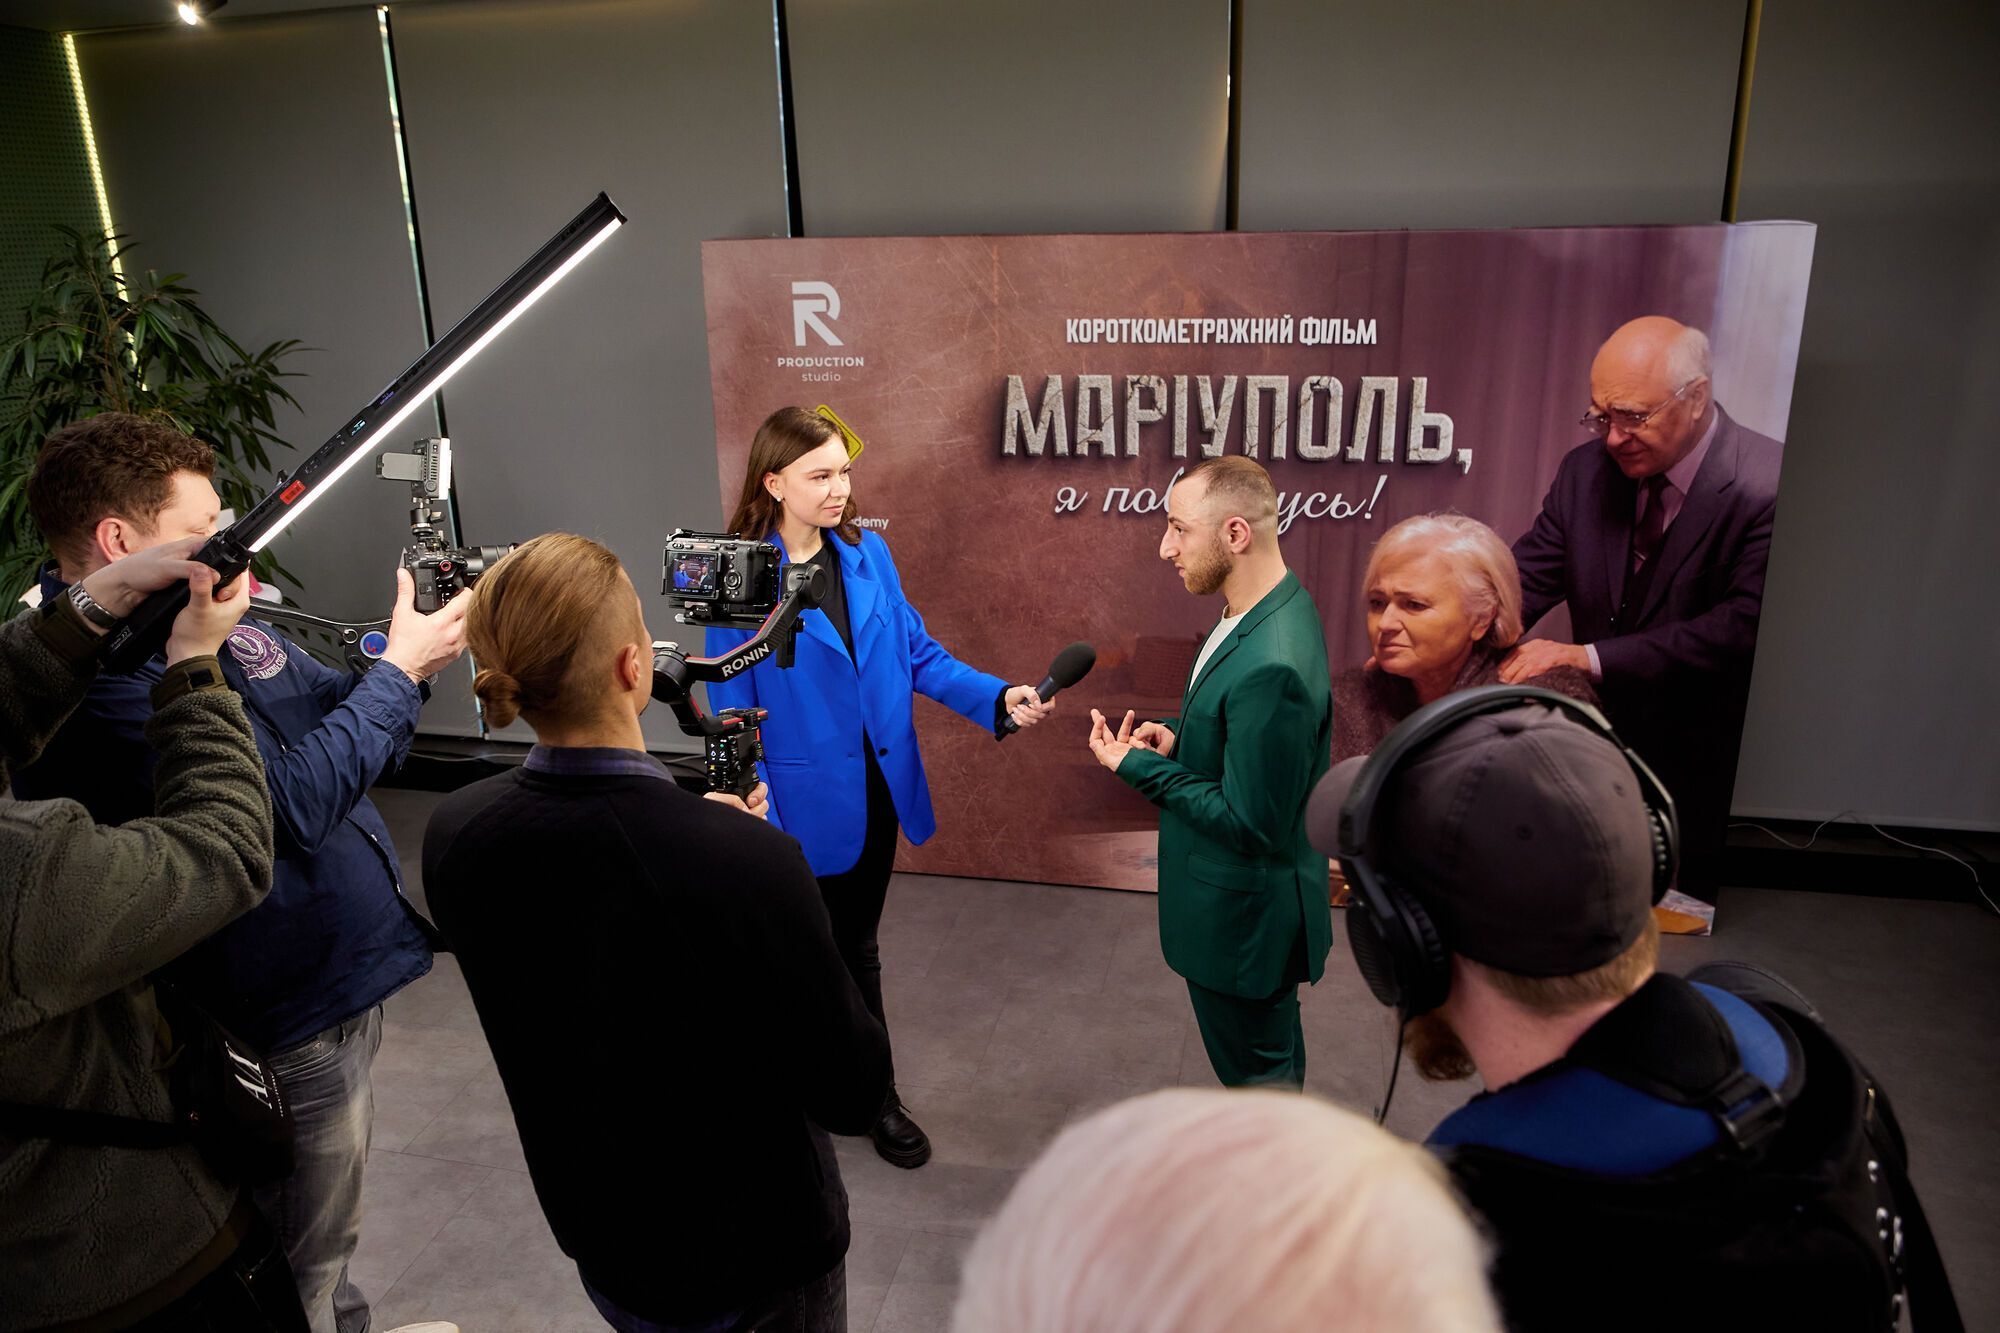 ''Mariupol, I'll Be Back!'' A film about a heroic pediatric surgeon was presented in Kyiv